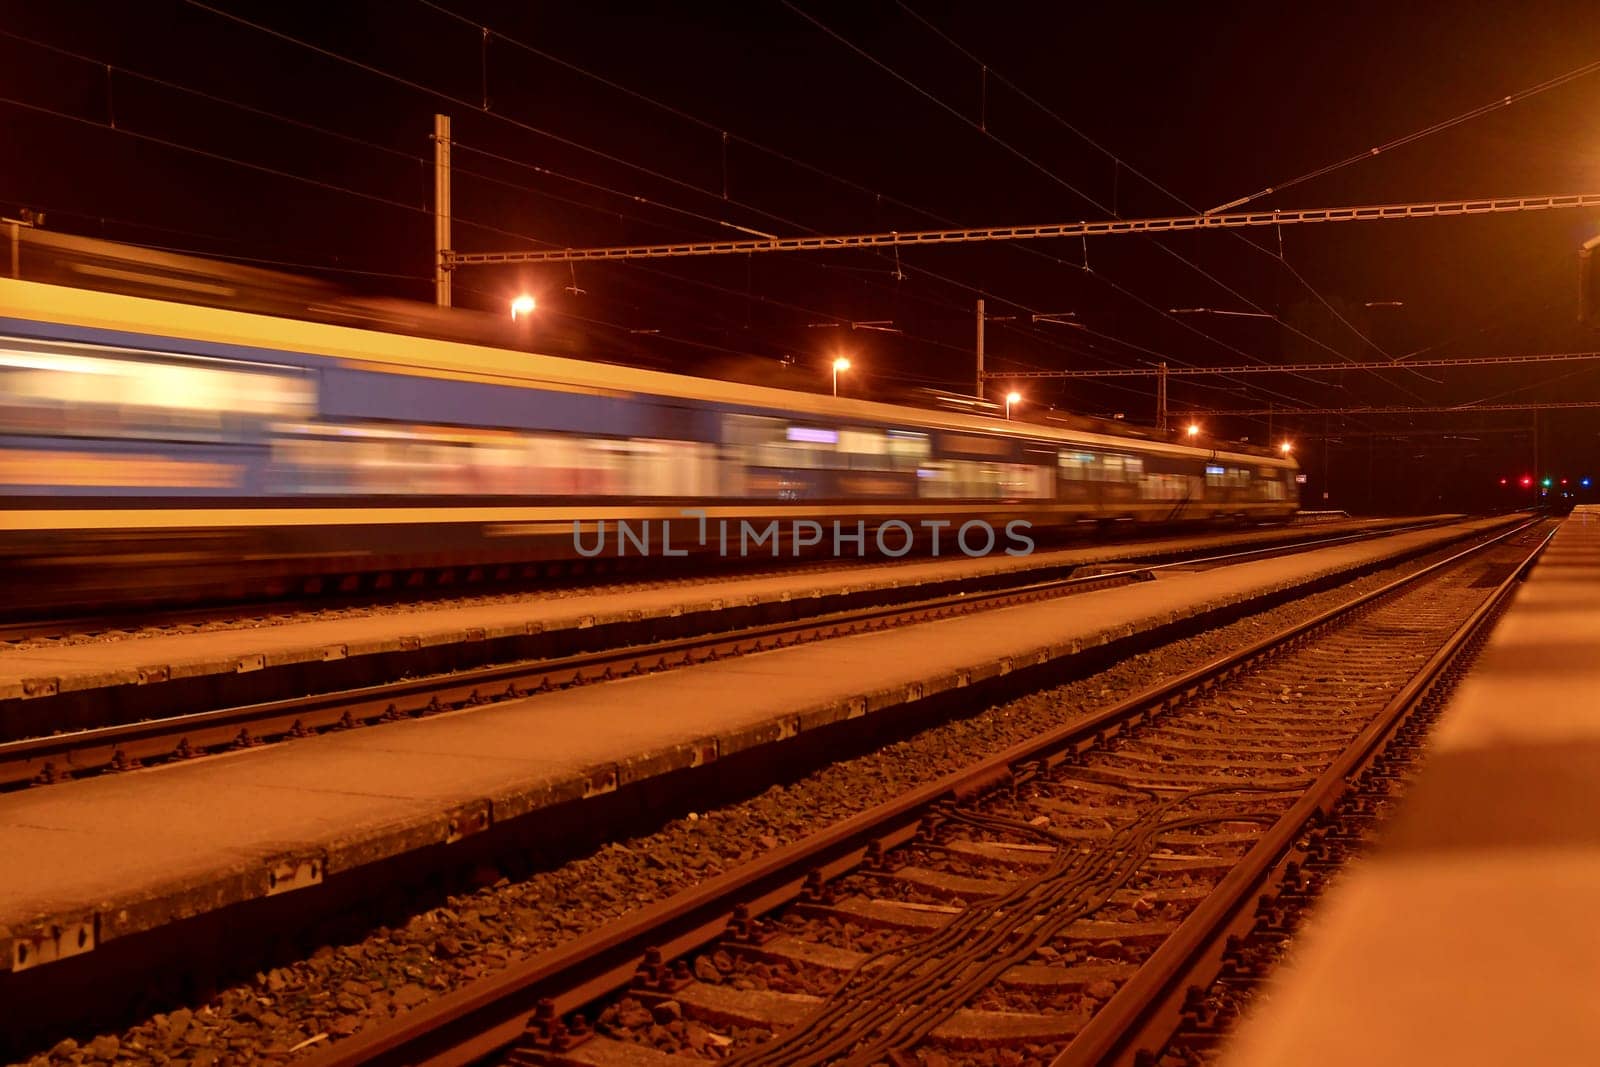 High speed passenger train on tracks with motion blur effect at night. Railway station in the Czech Republic.